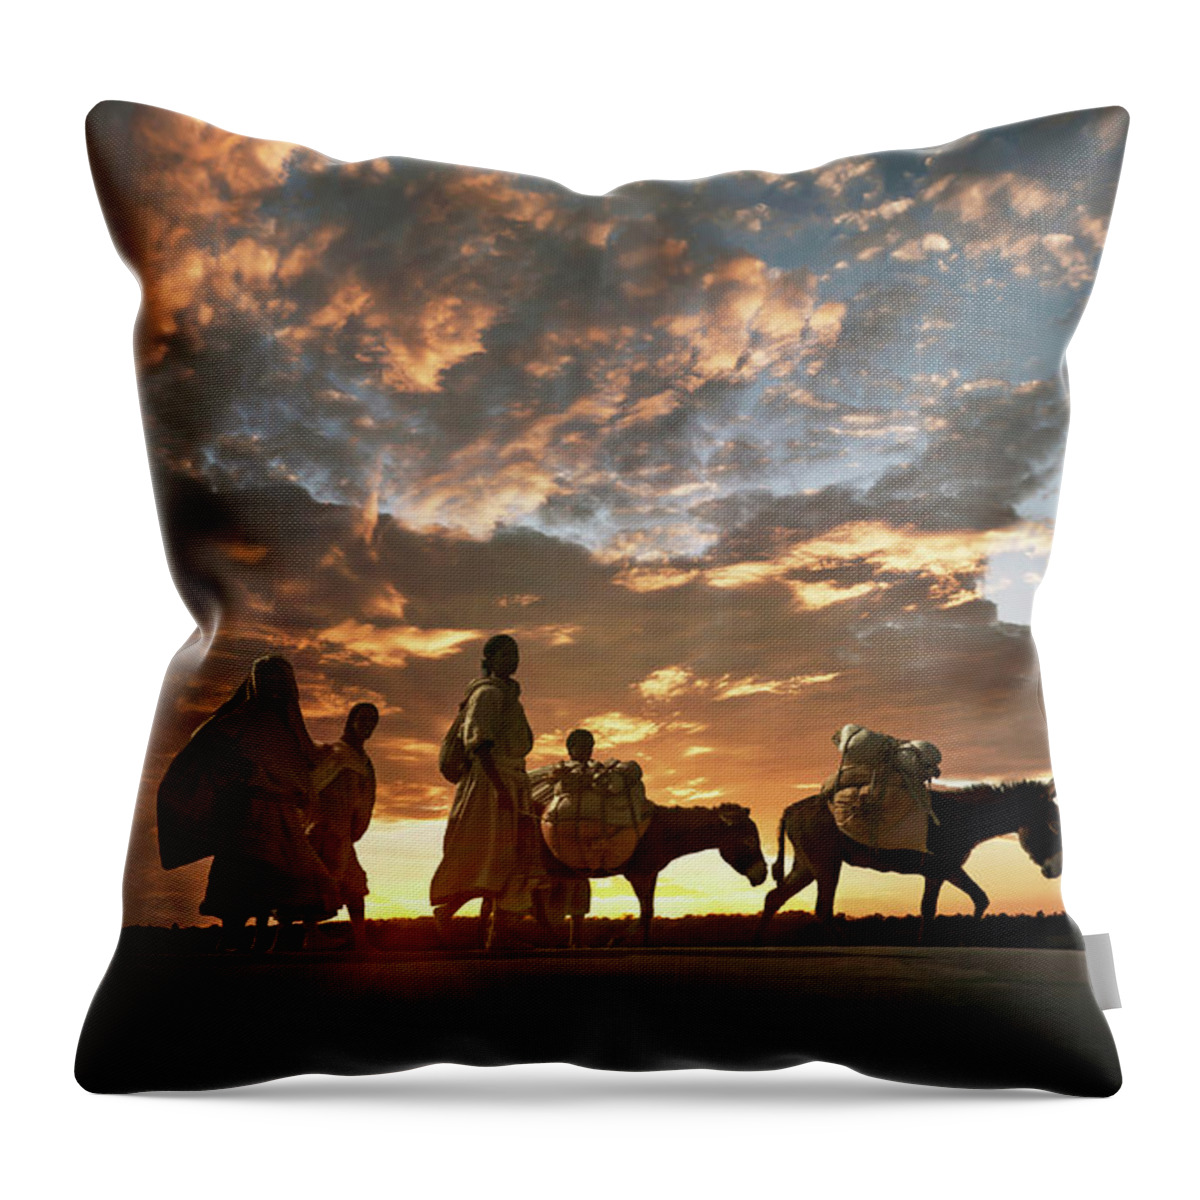 Goal Throw Pillow featuring the photograph Amhara Women On The Way To Market by Buena Vista Images